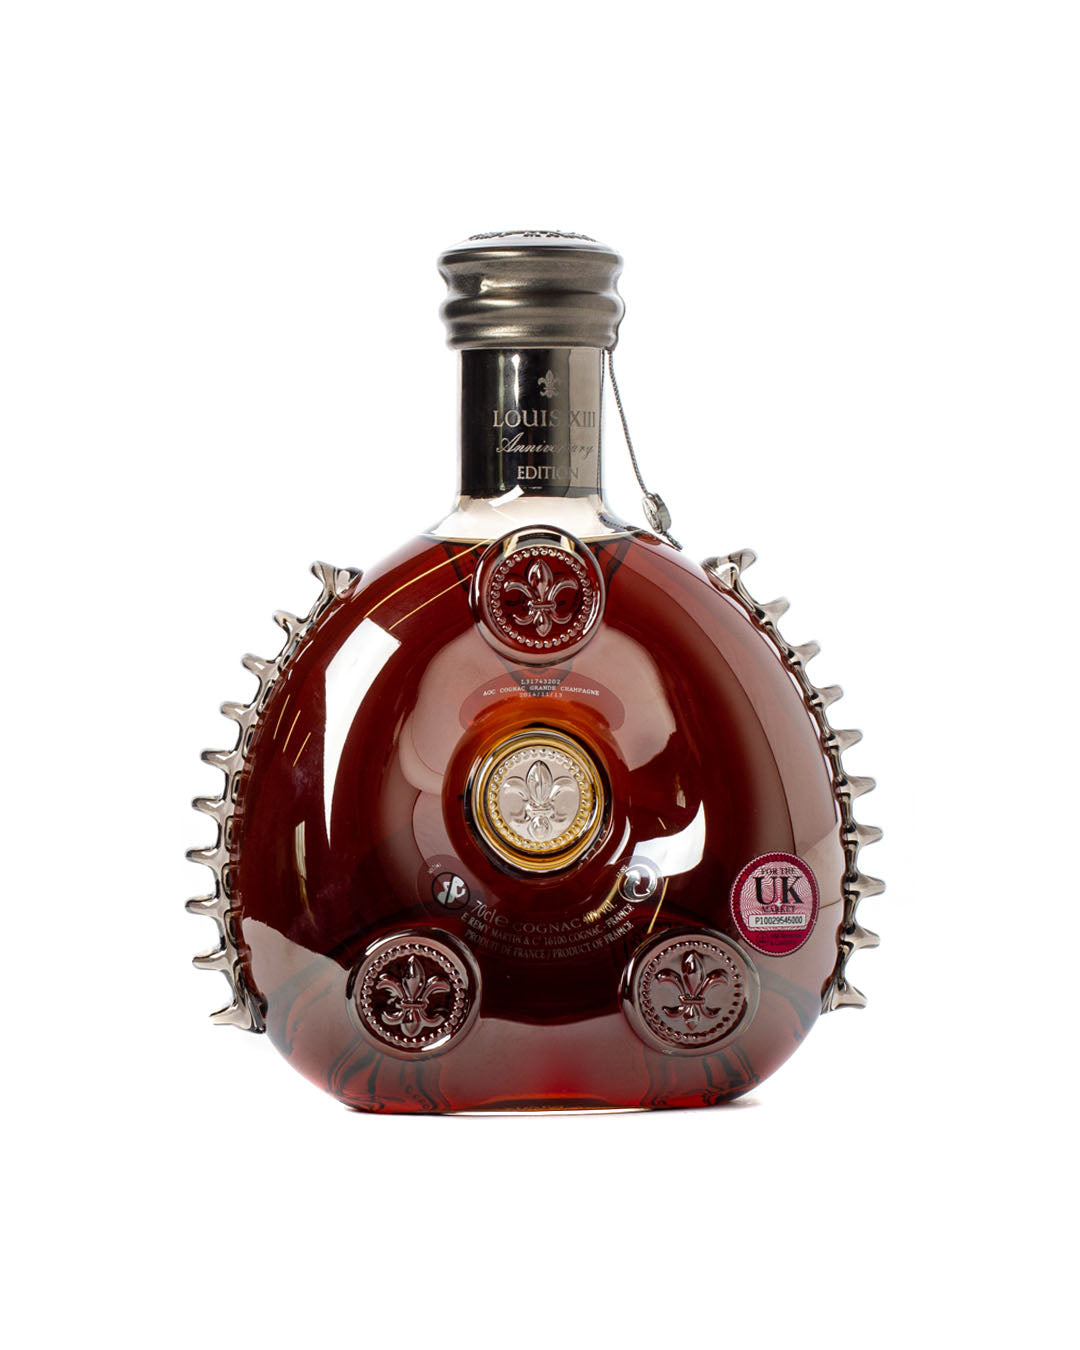 Rémy Martin's Louis XIII Black Pearl Anniversary Edition - COOL